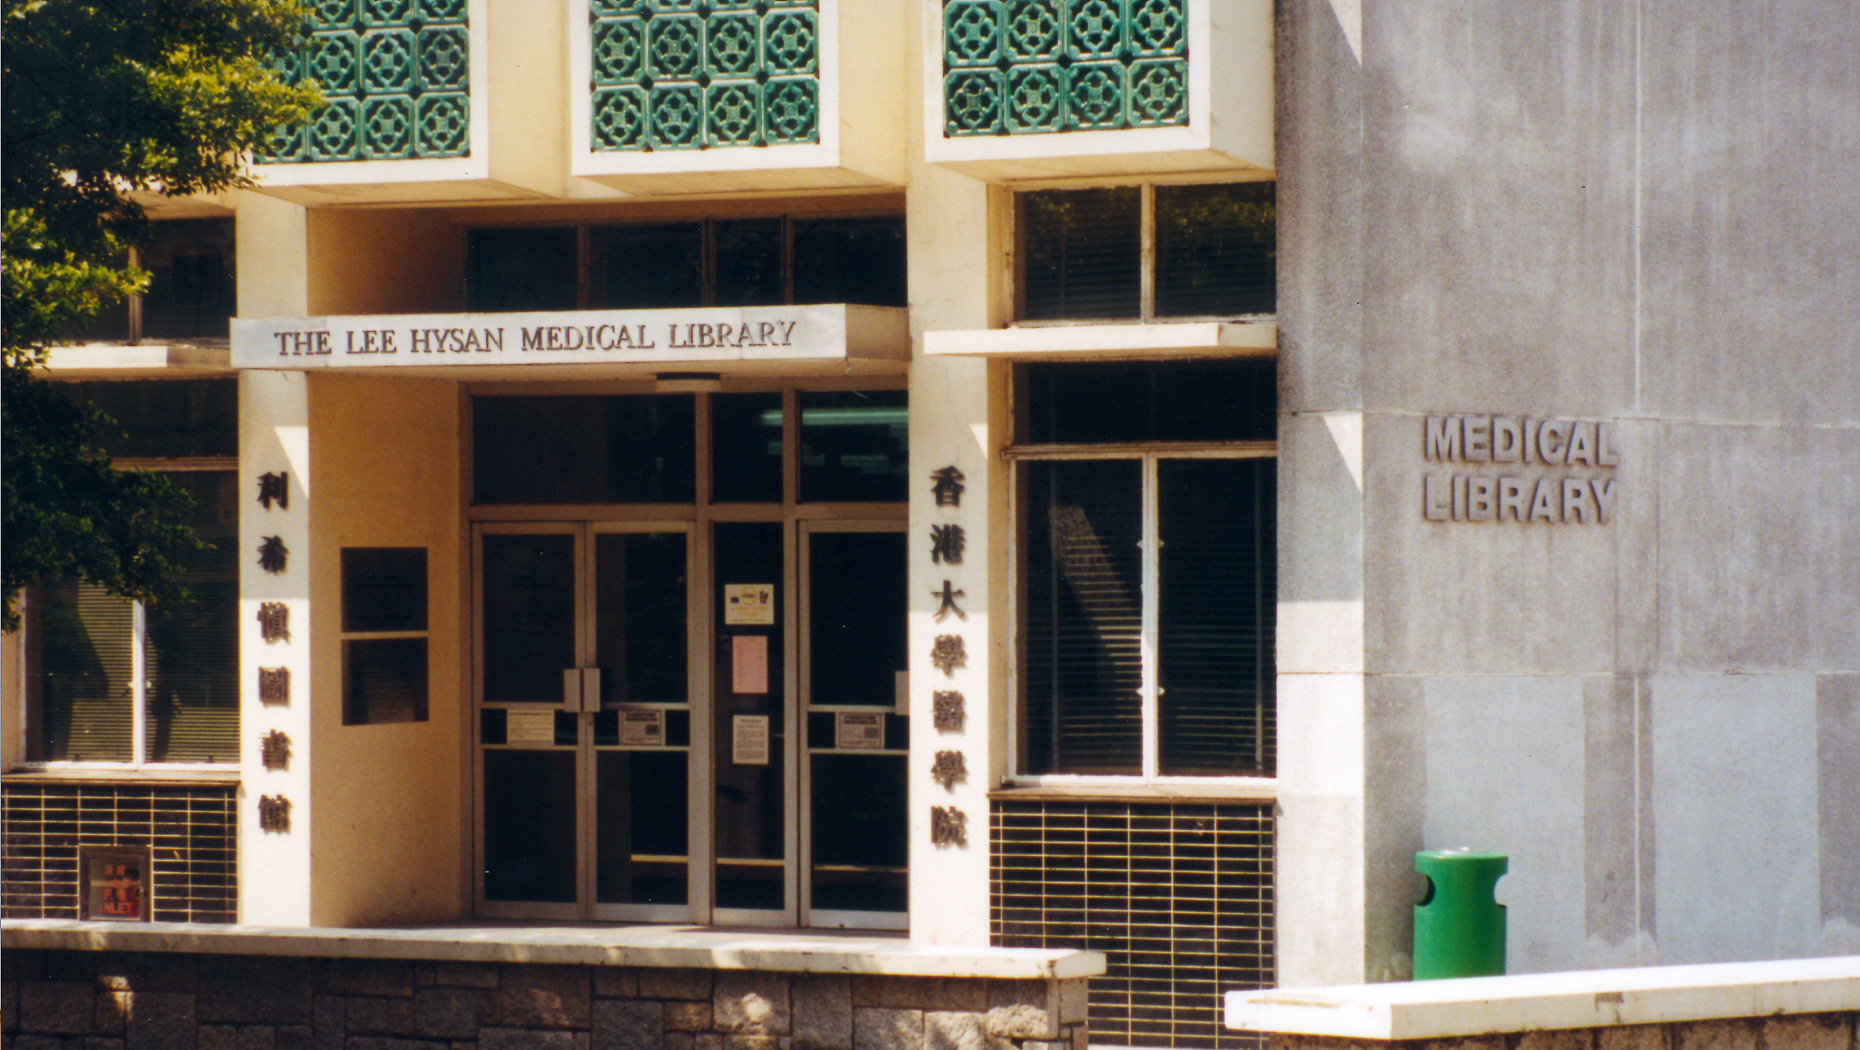 The Medical Library is renamed The Lee Hysan Medical Library